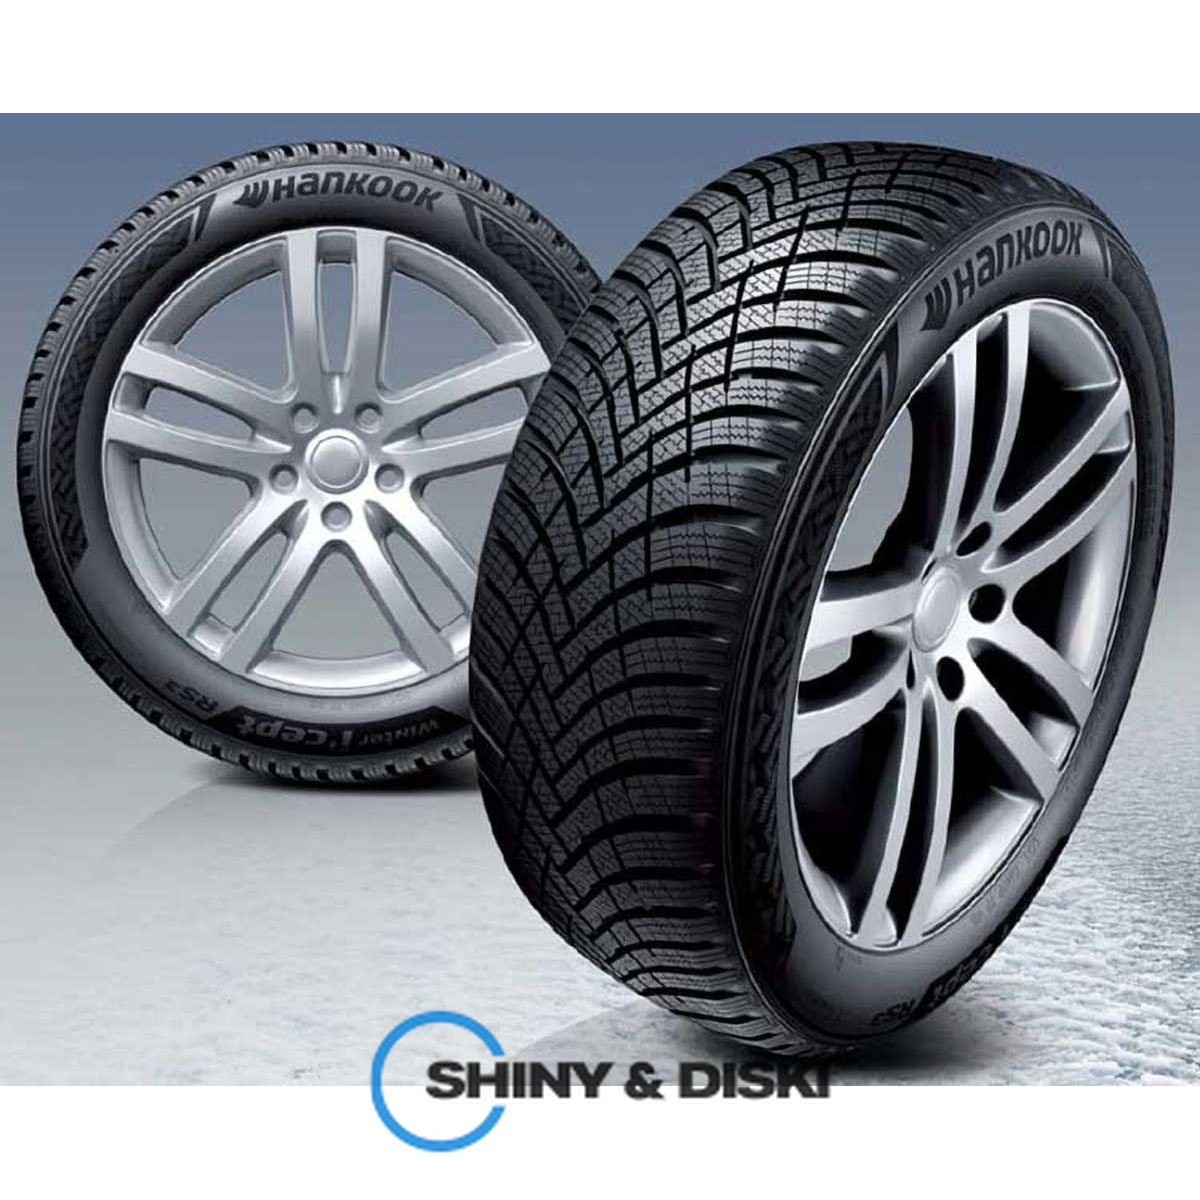 покрышки hankook winter i*cept rs3 w462 195/60 r16 93h xl